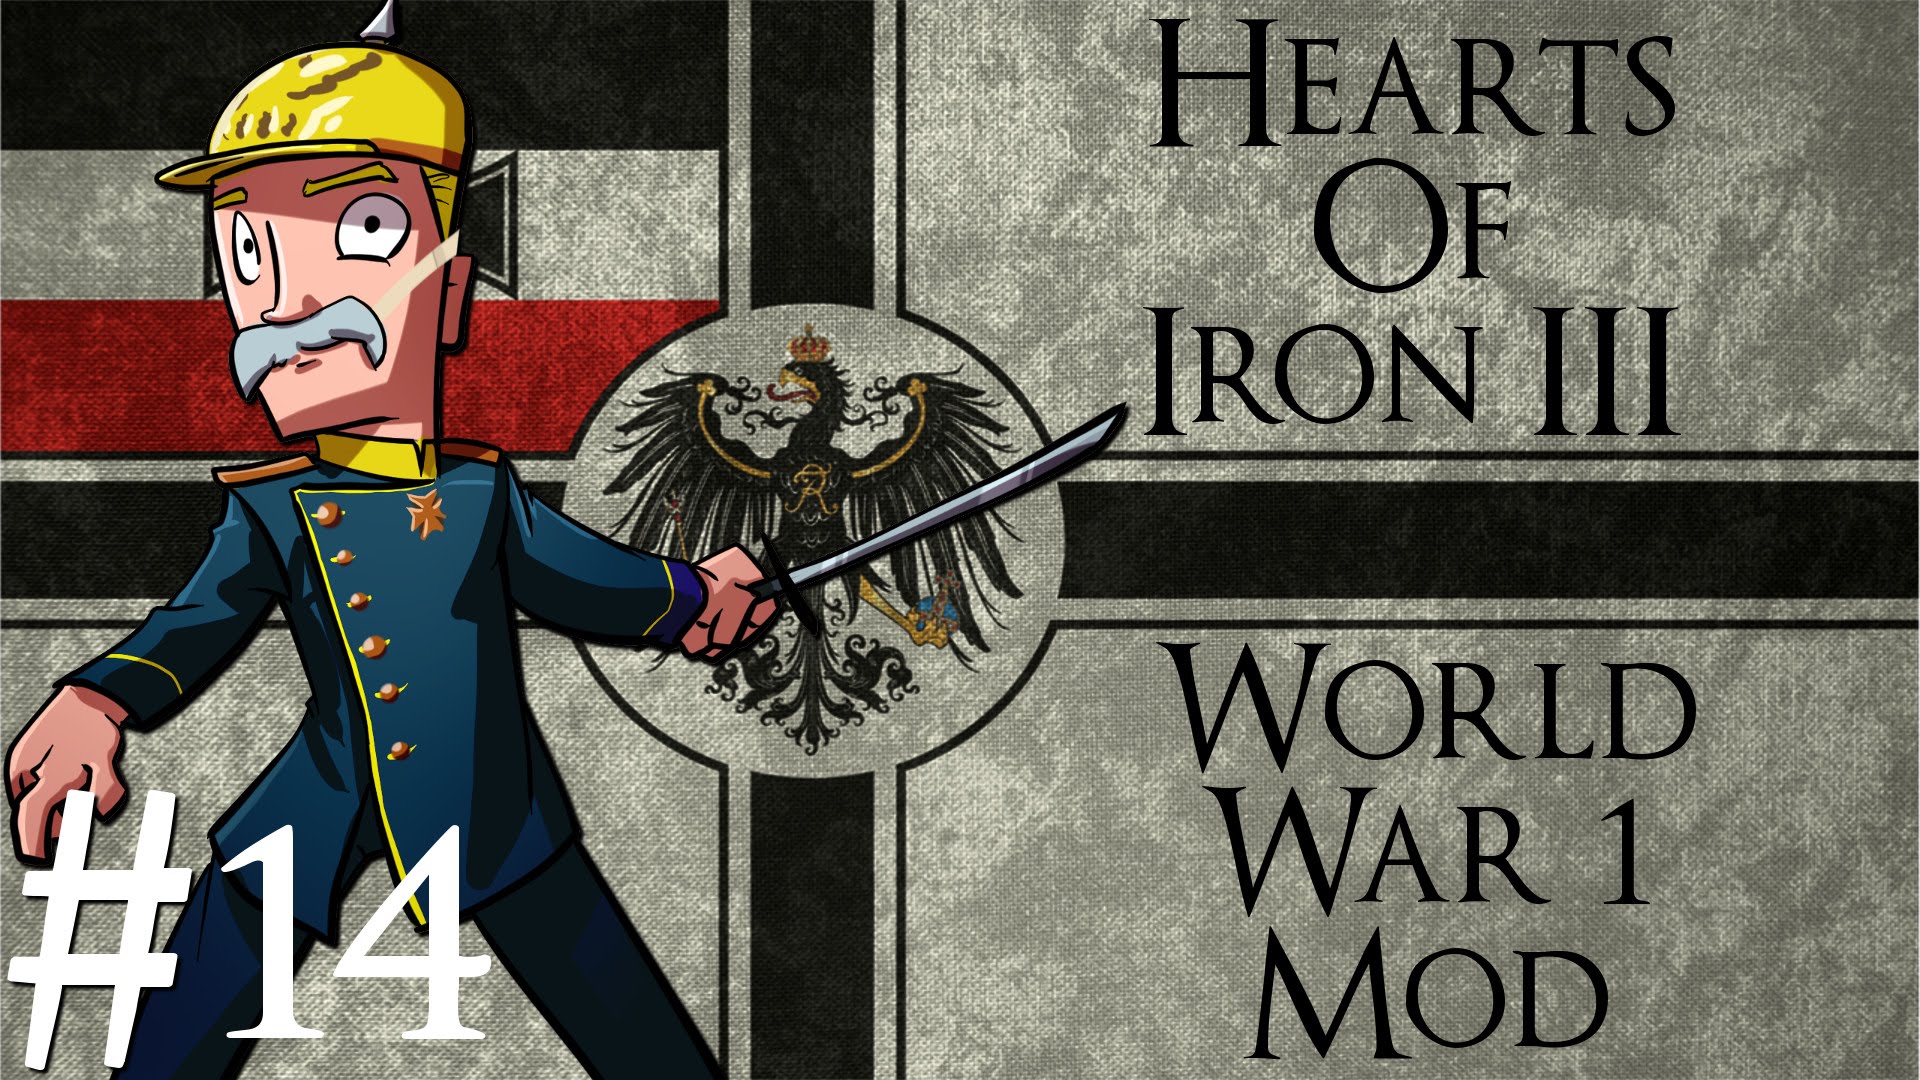 Hearts of Iron 3 | World War 1 mod | German Empire | Part 14 | Gains On All Fronts